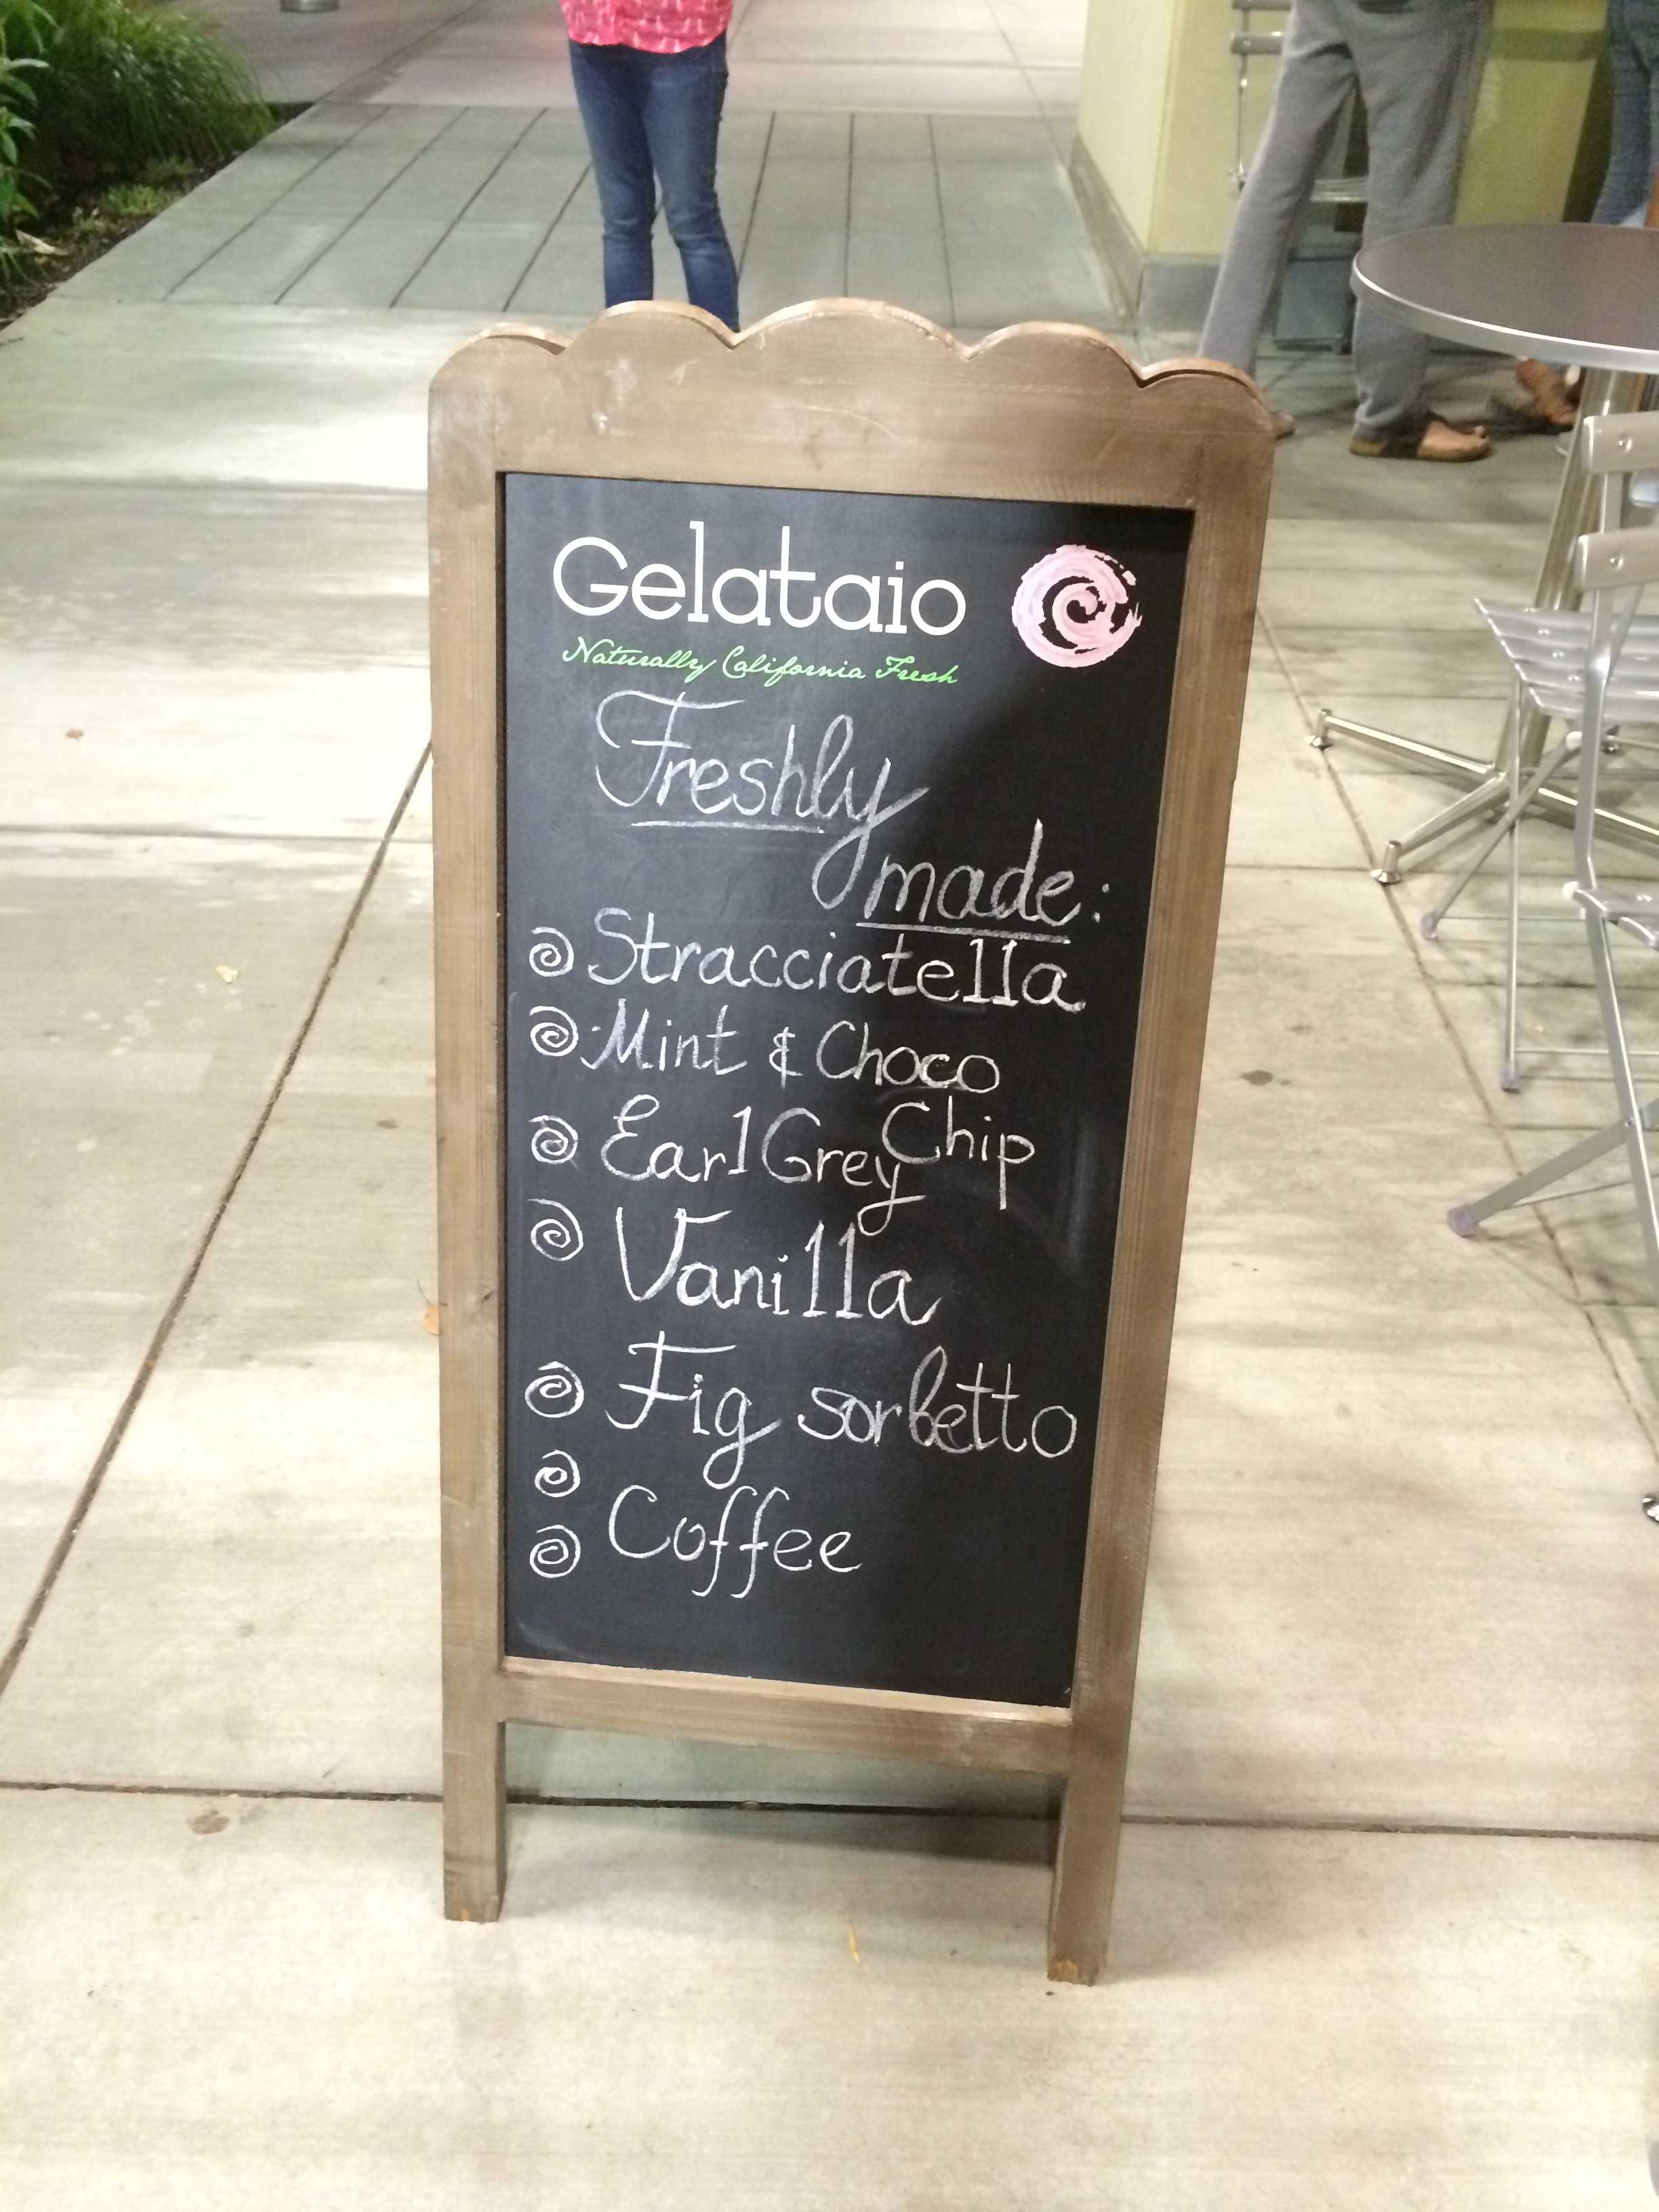 The sign outside of Gelataio advertising freshly made flavors. The sign also displays its slogan: "Naturally California Fresh." Photo by Maddy Jones.